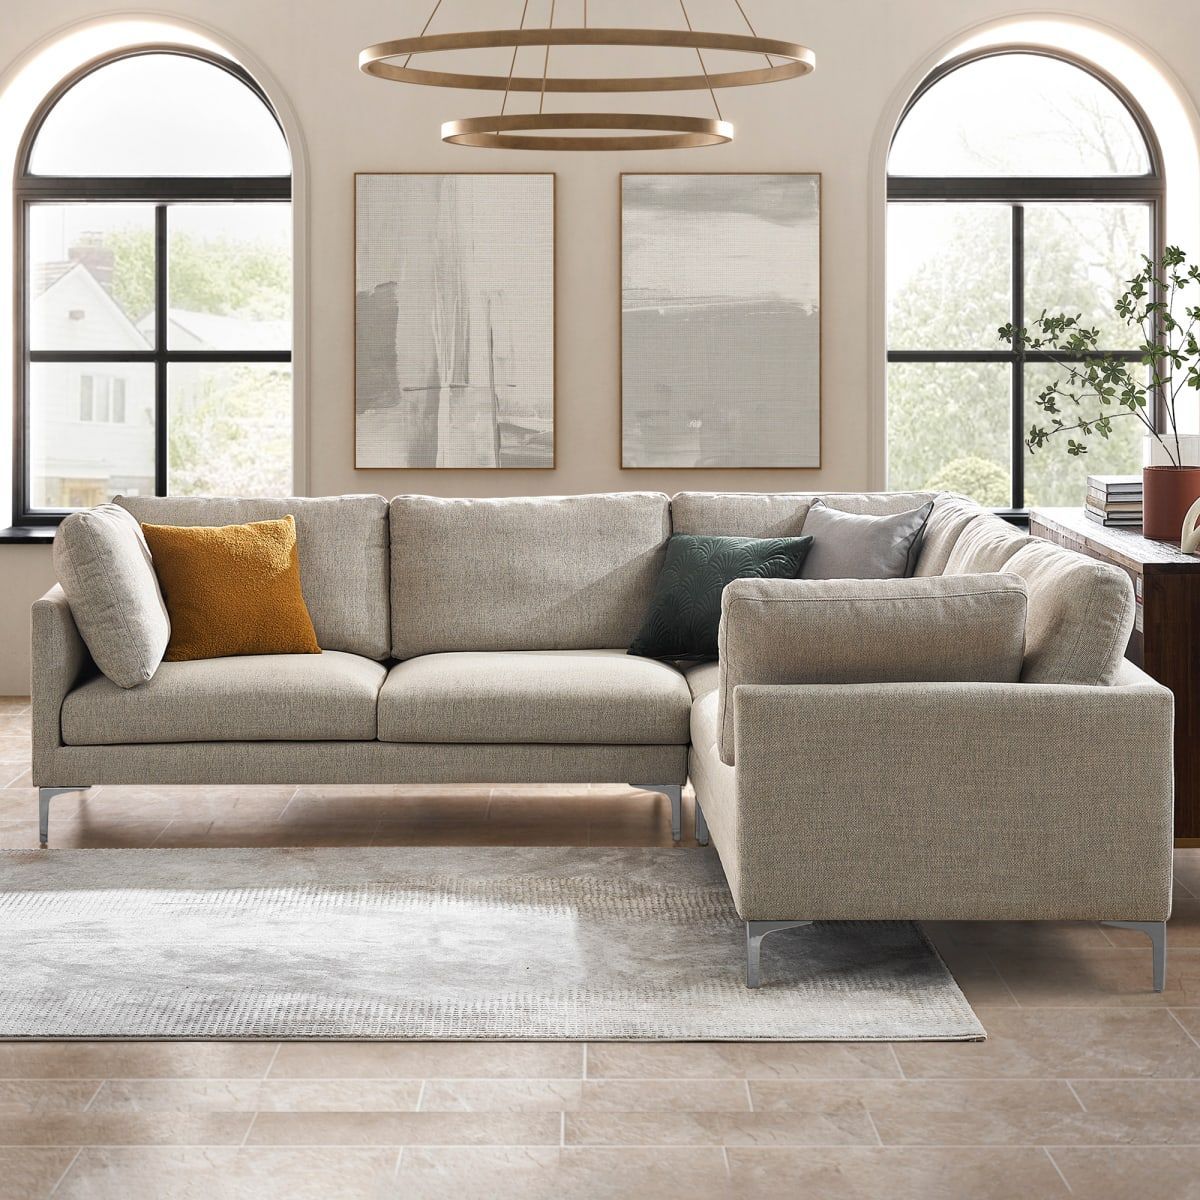 Adams L Shape Sectional Sofa | Castlery | Classic Living Room, Sectional  Sofa, Castlery Regarding Beige L Shaped Sectional Sofas (View 4 of 15)